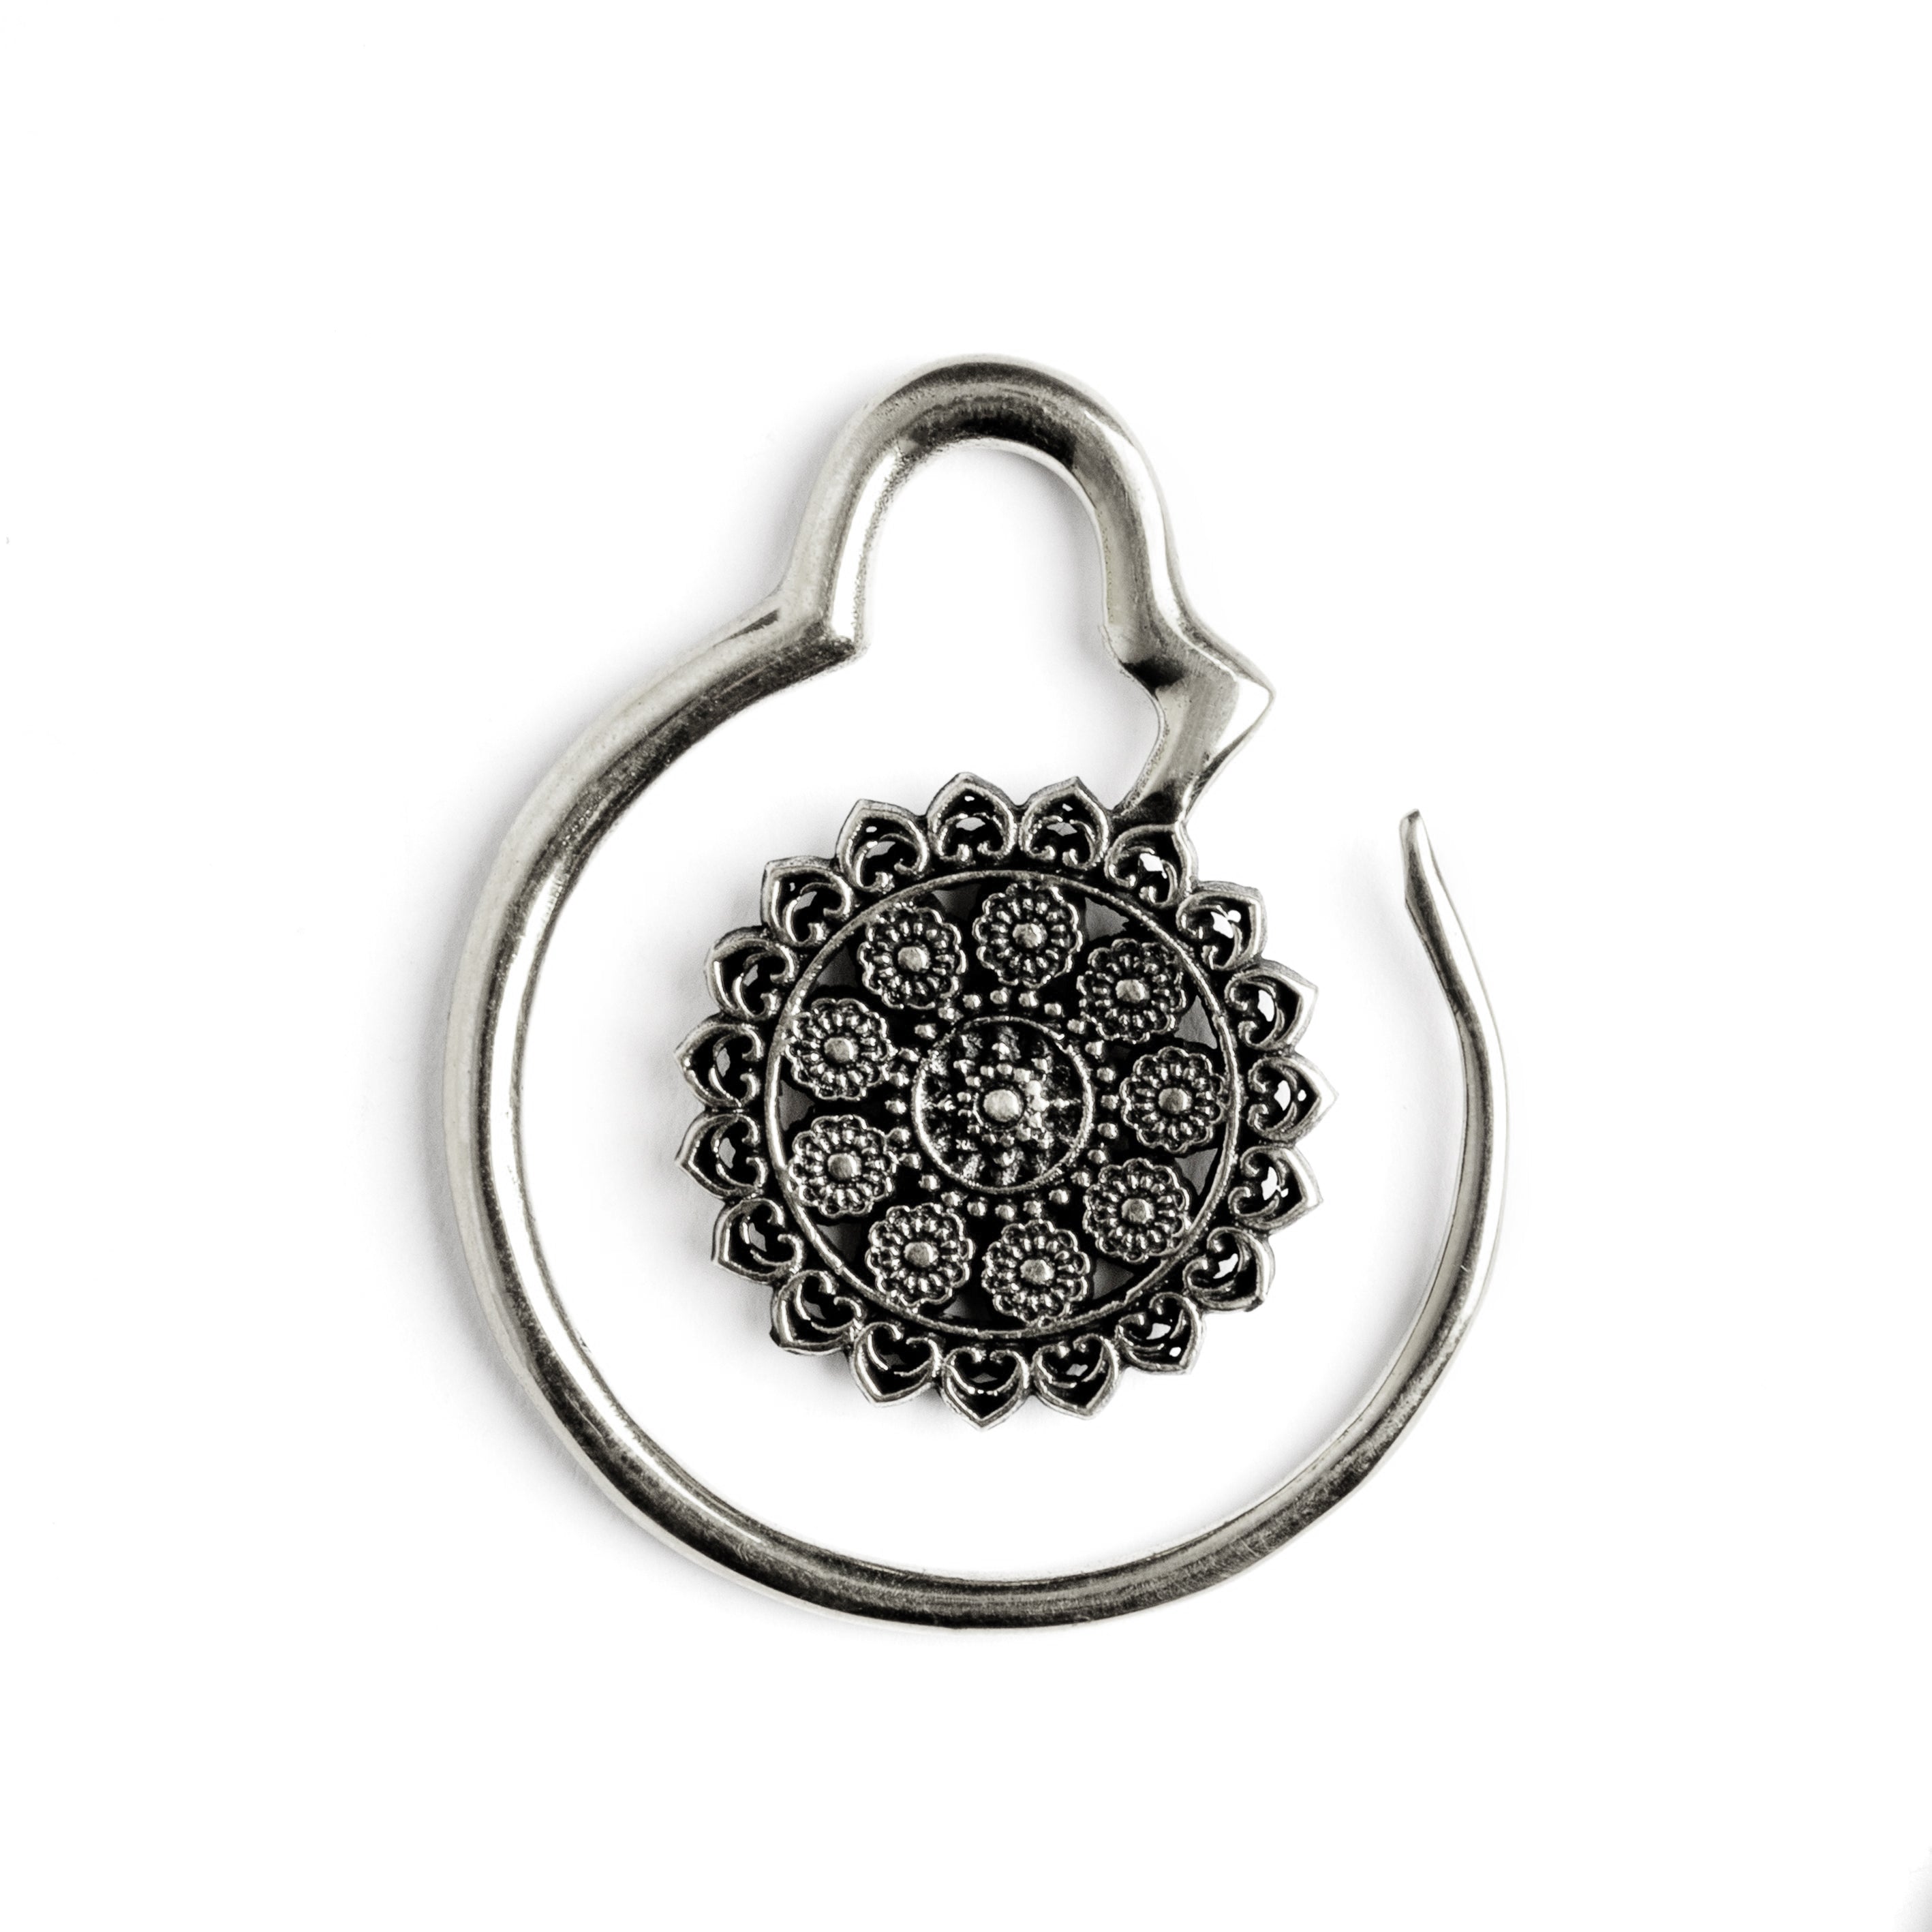 single silver brass hook ear hanger with intricate floral filigree frontal view